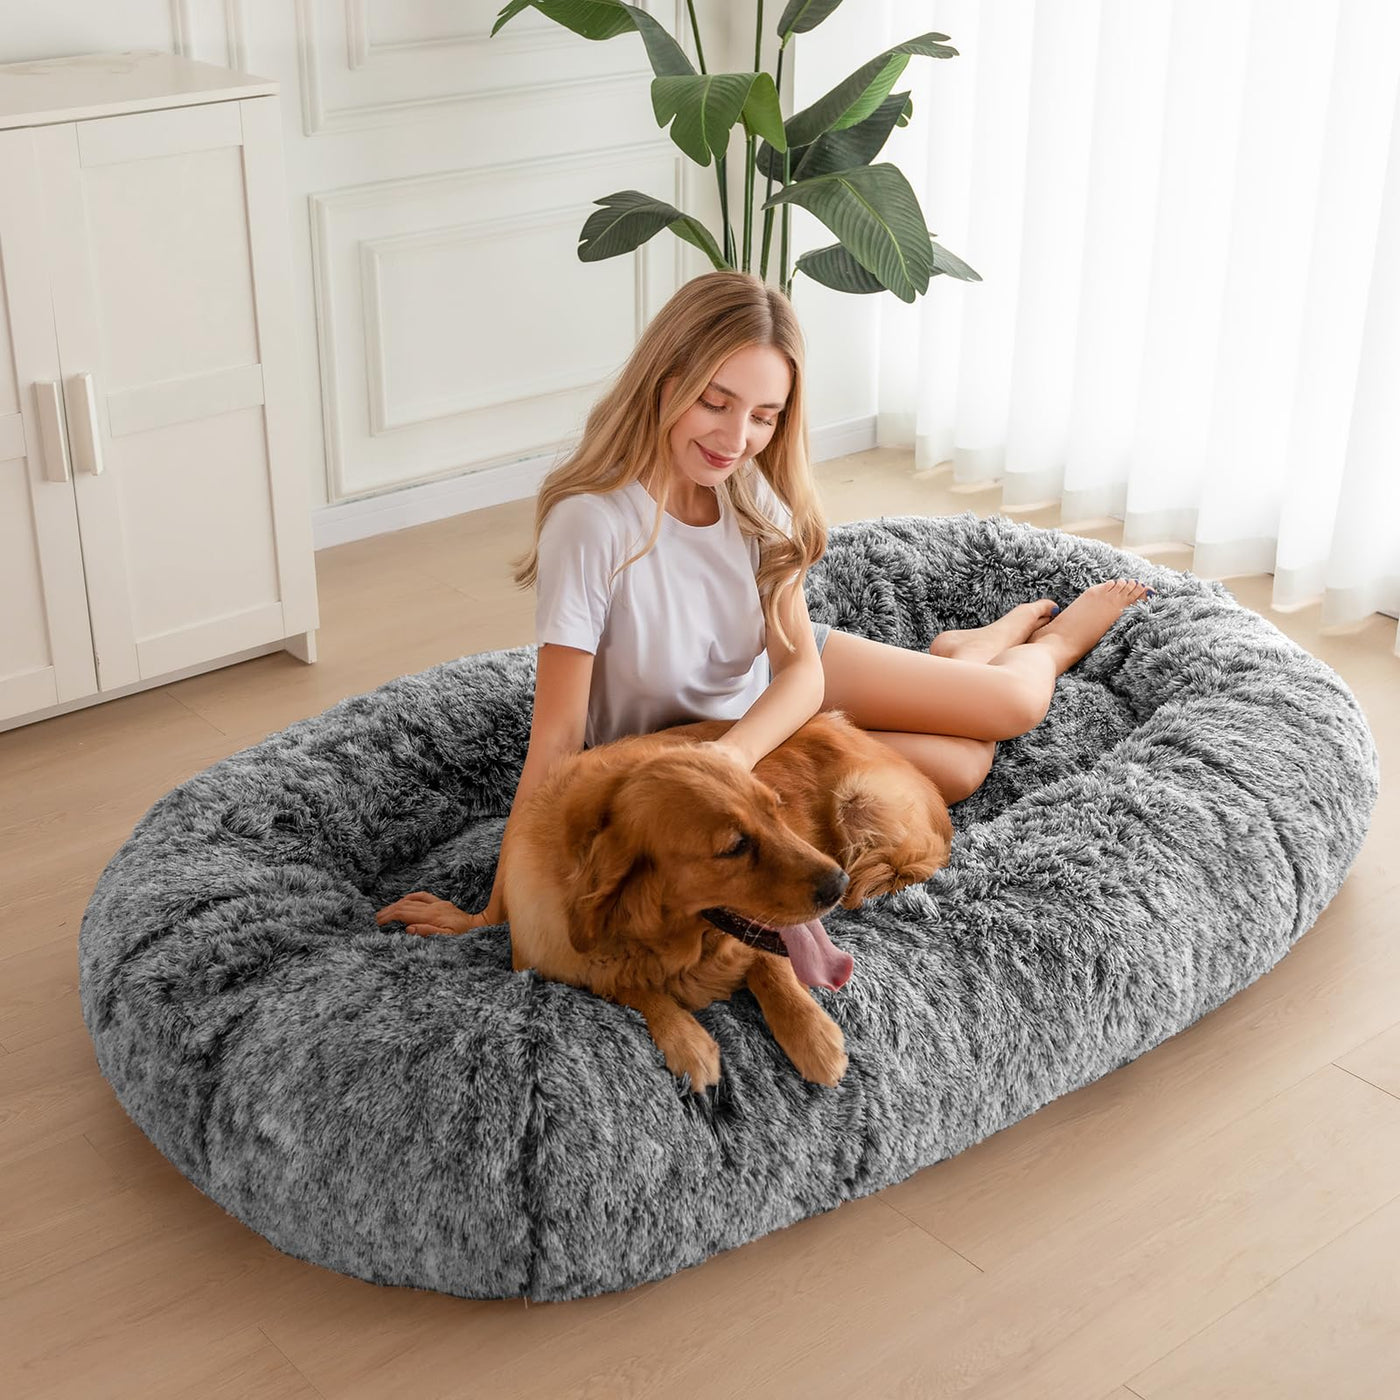 MAXYOYO Dog Bed for Human, Faux Fur Giant Bean Bag Bed for People Adults, 72.8"x45.3"x12"